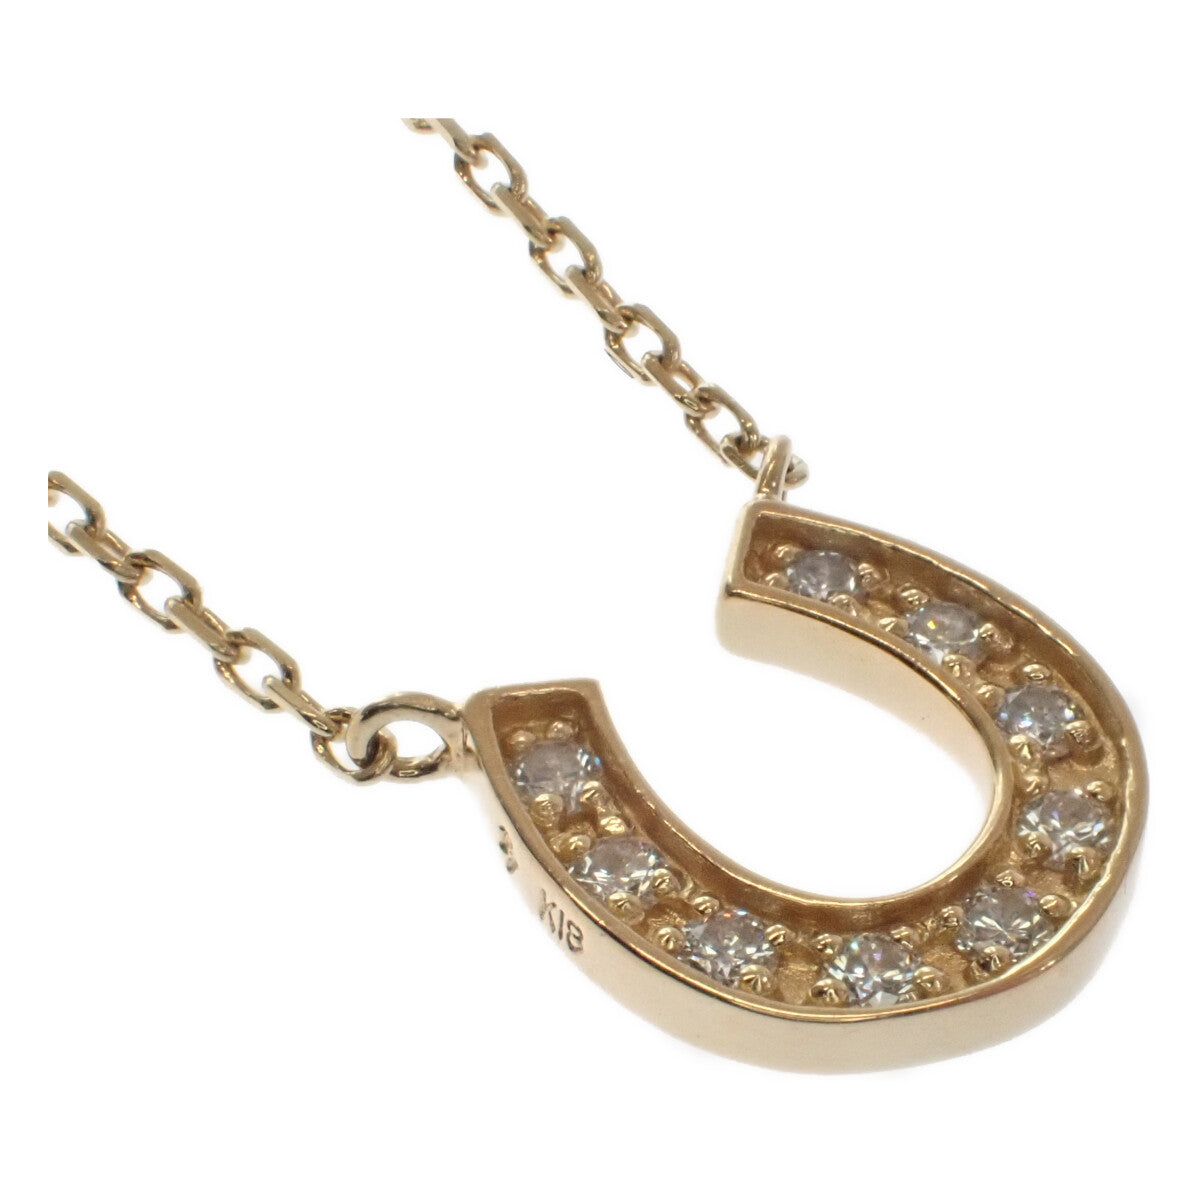 K18 Yellow Gold"Ponte Vecchio" Horseshoe Necklace with 0.04ct Diamond Pendant - Exquisite Jewelry for Women- Gold- (Pre-owned)